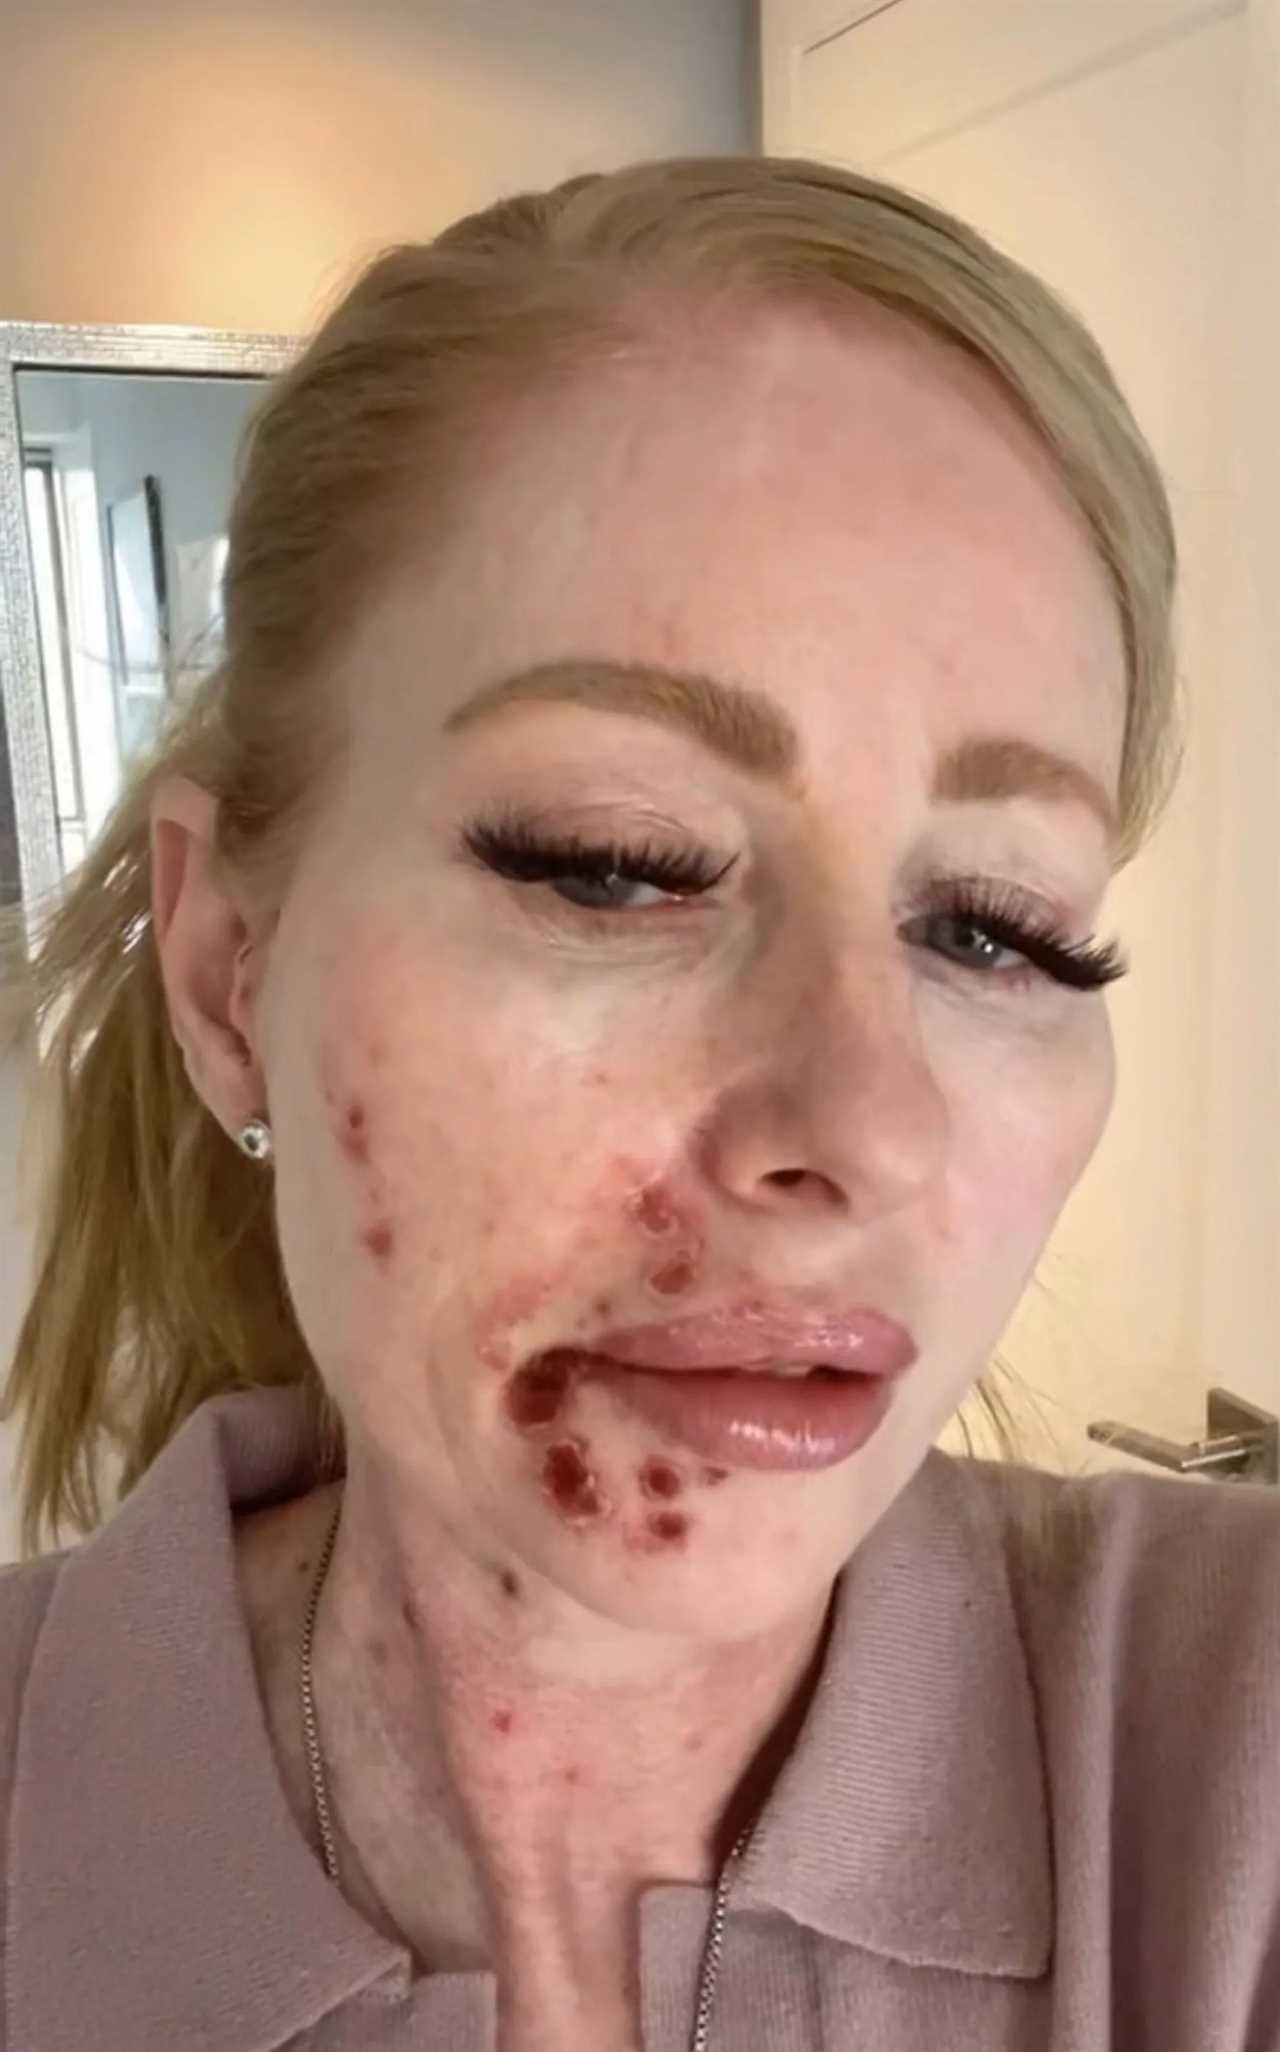 I thought I had eczema on my face but the truth was much worse – I look like an acid attack victim